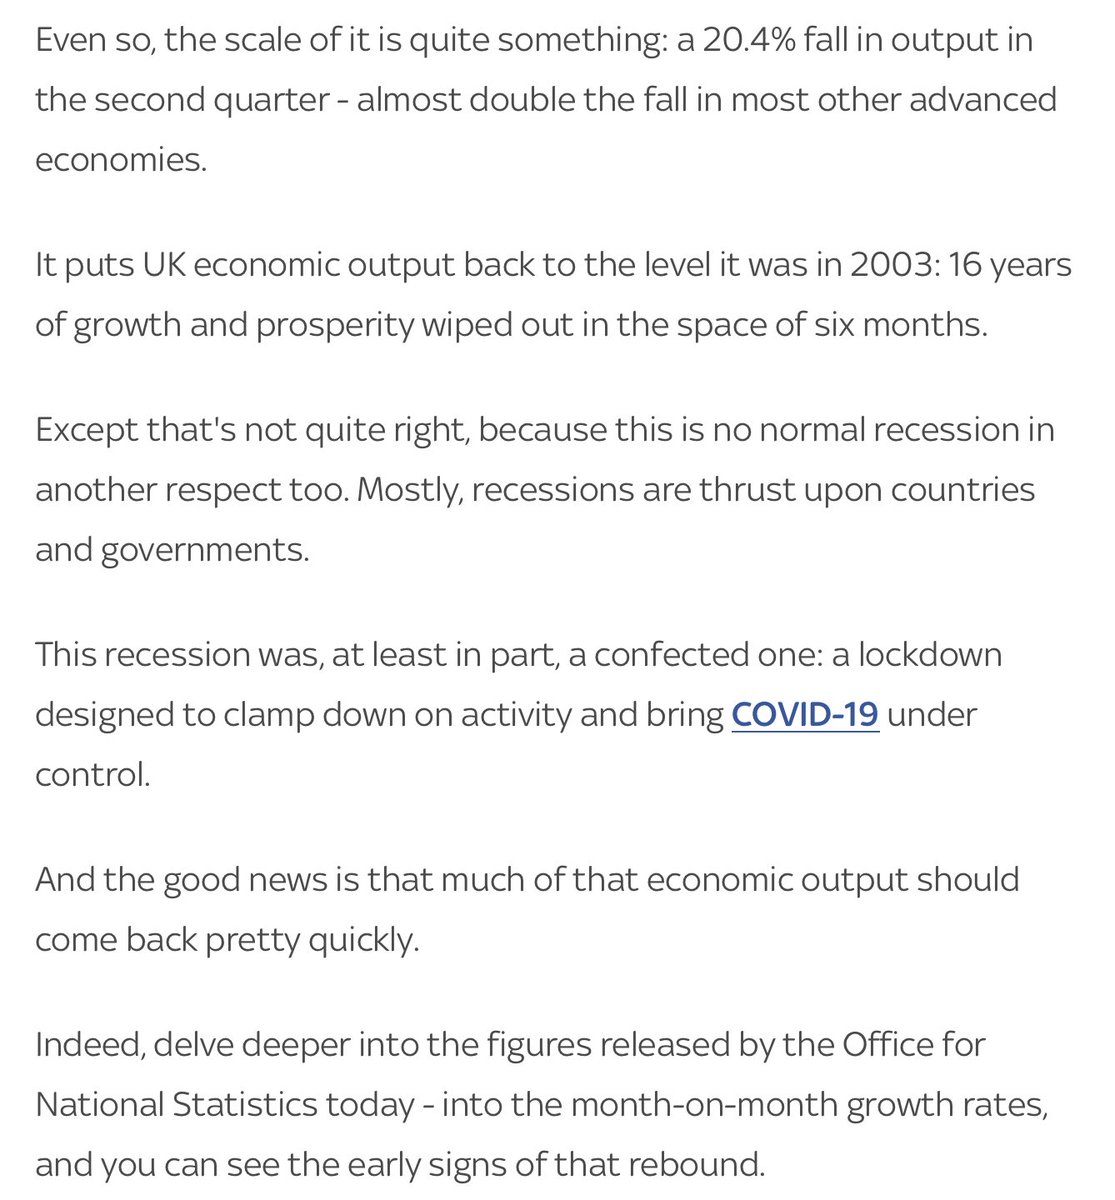 Not just any recession. A recession unlike anything we've seen before and anything we will probably see again.That's bad news, but it's also good news.My  @skynews analysis on today's GDP figures, and why none of the usual rules apply this time around:  https://news.sky.com/story/coronavirus-the-scale-of-this-economic-contraction-is-unlikely-ever-to-be-repeated-12047575